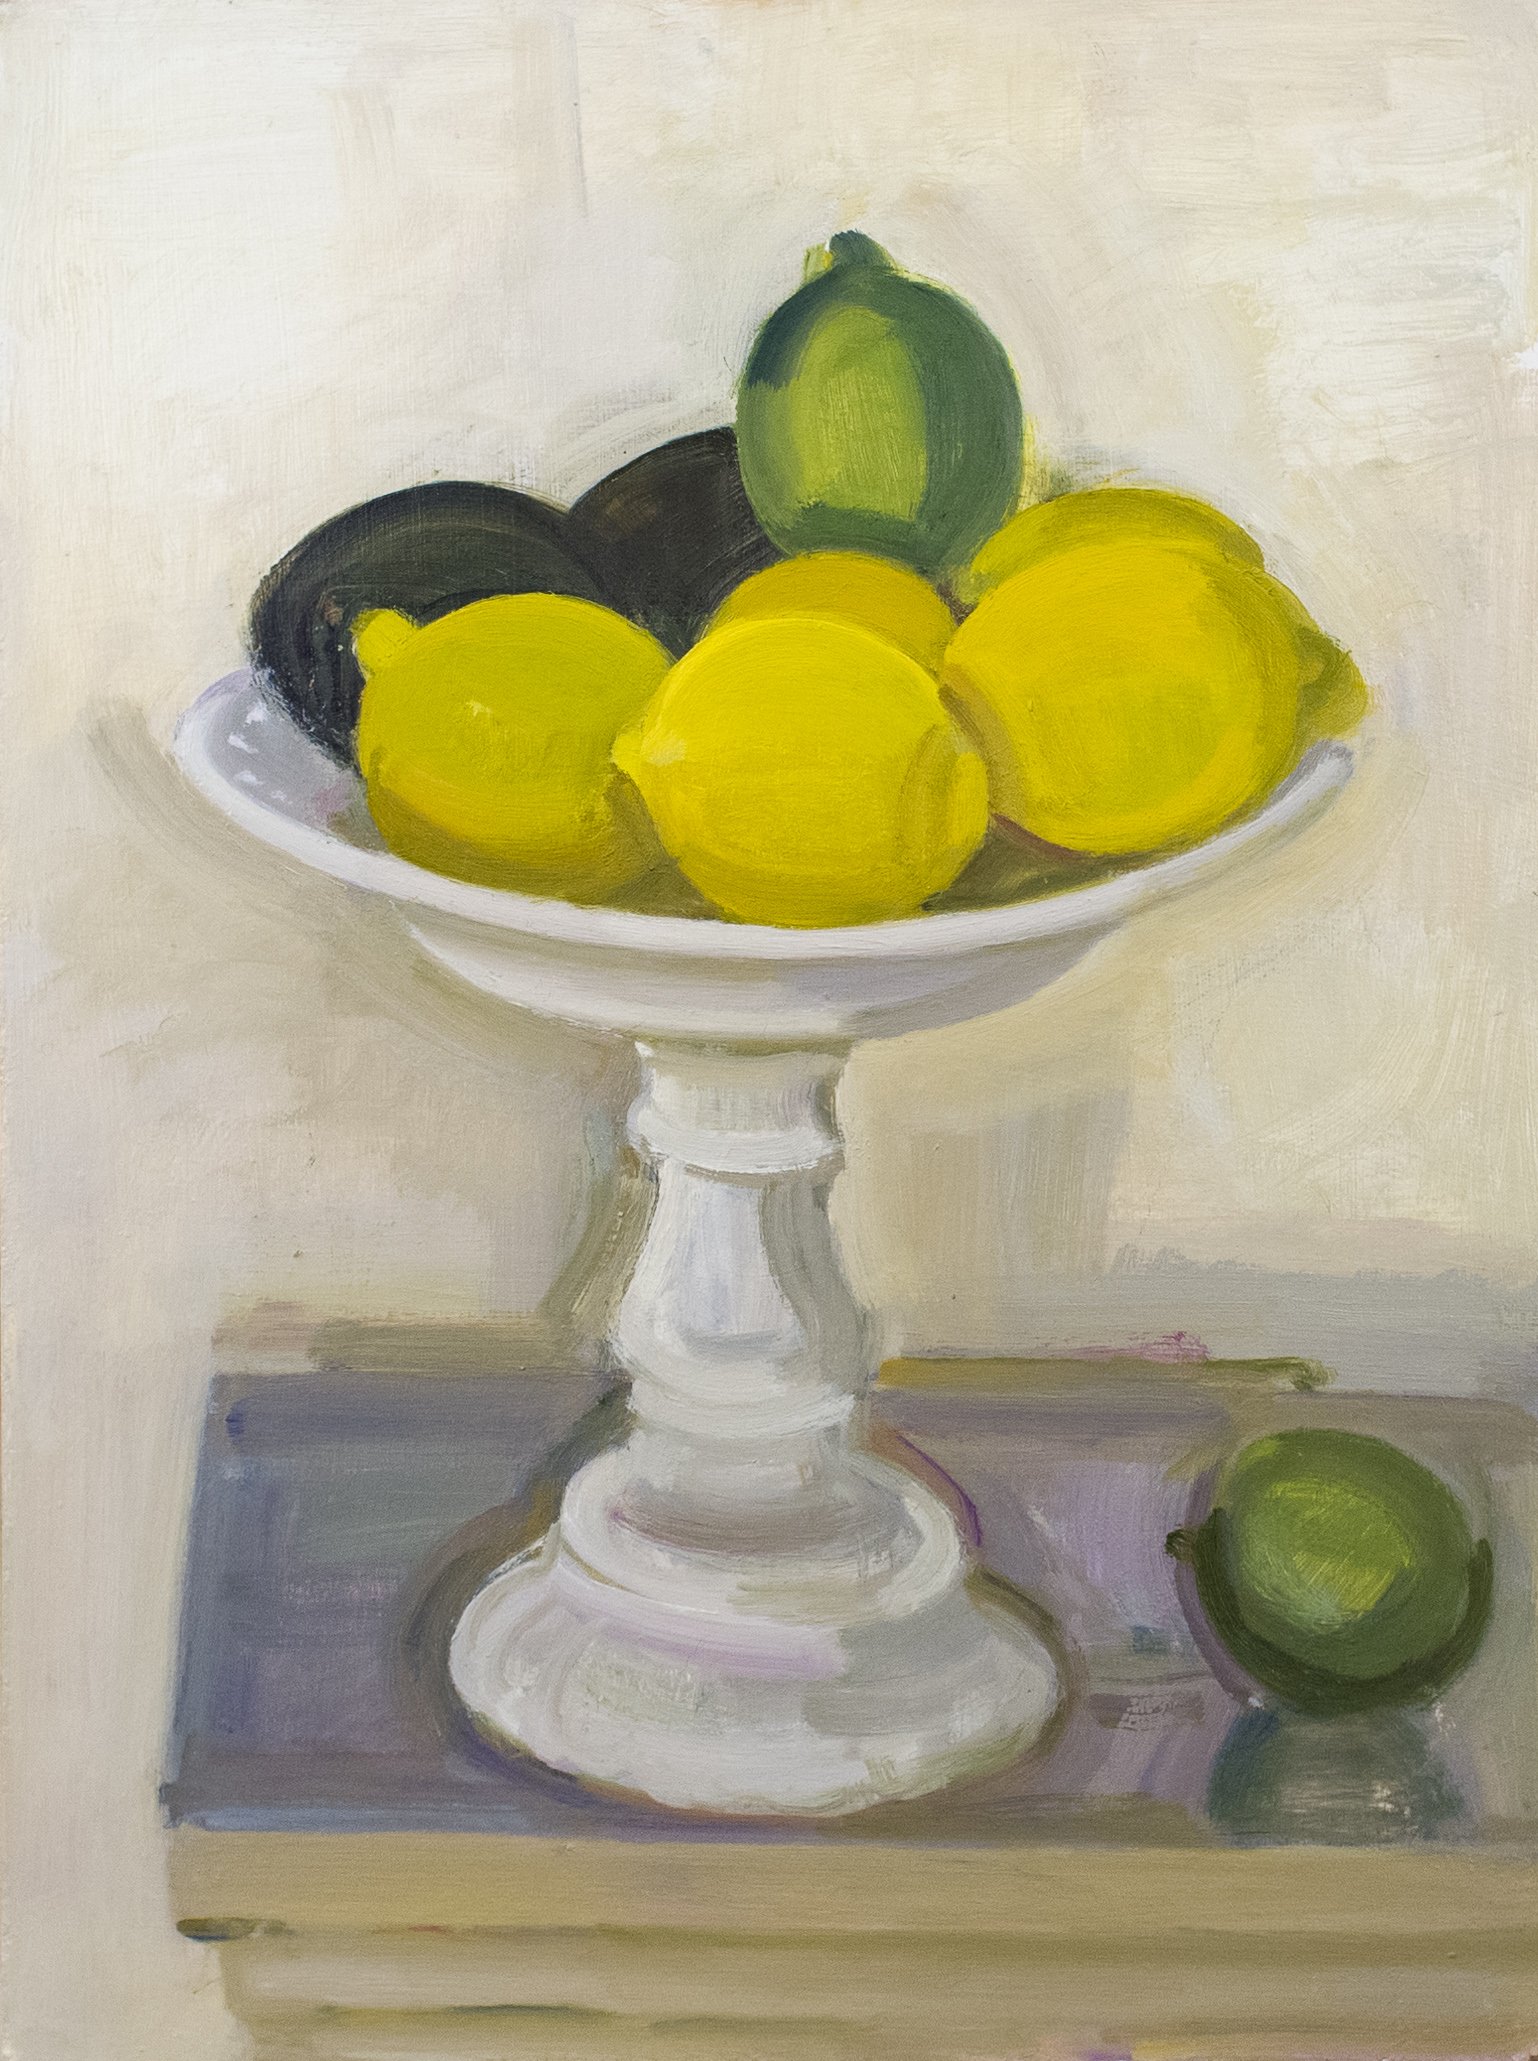   Lemons, Lime, and Avocado on Milk Glass Cake Stand , 2017, oil/panel, 16 x 12 in.  (Not for sale)  